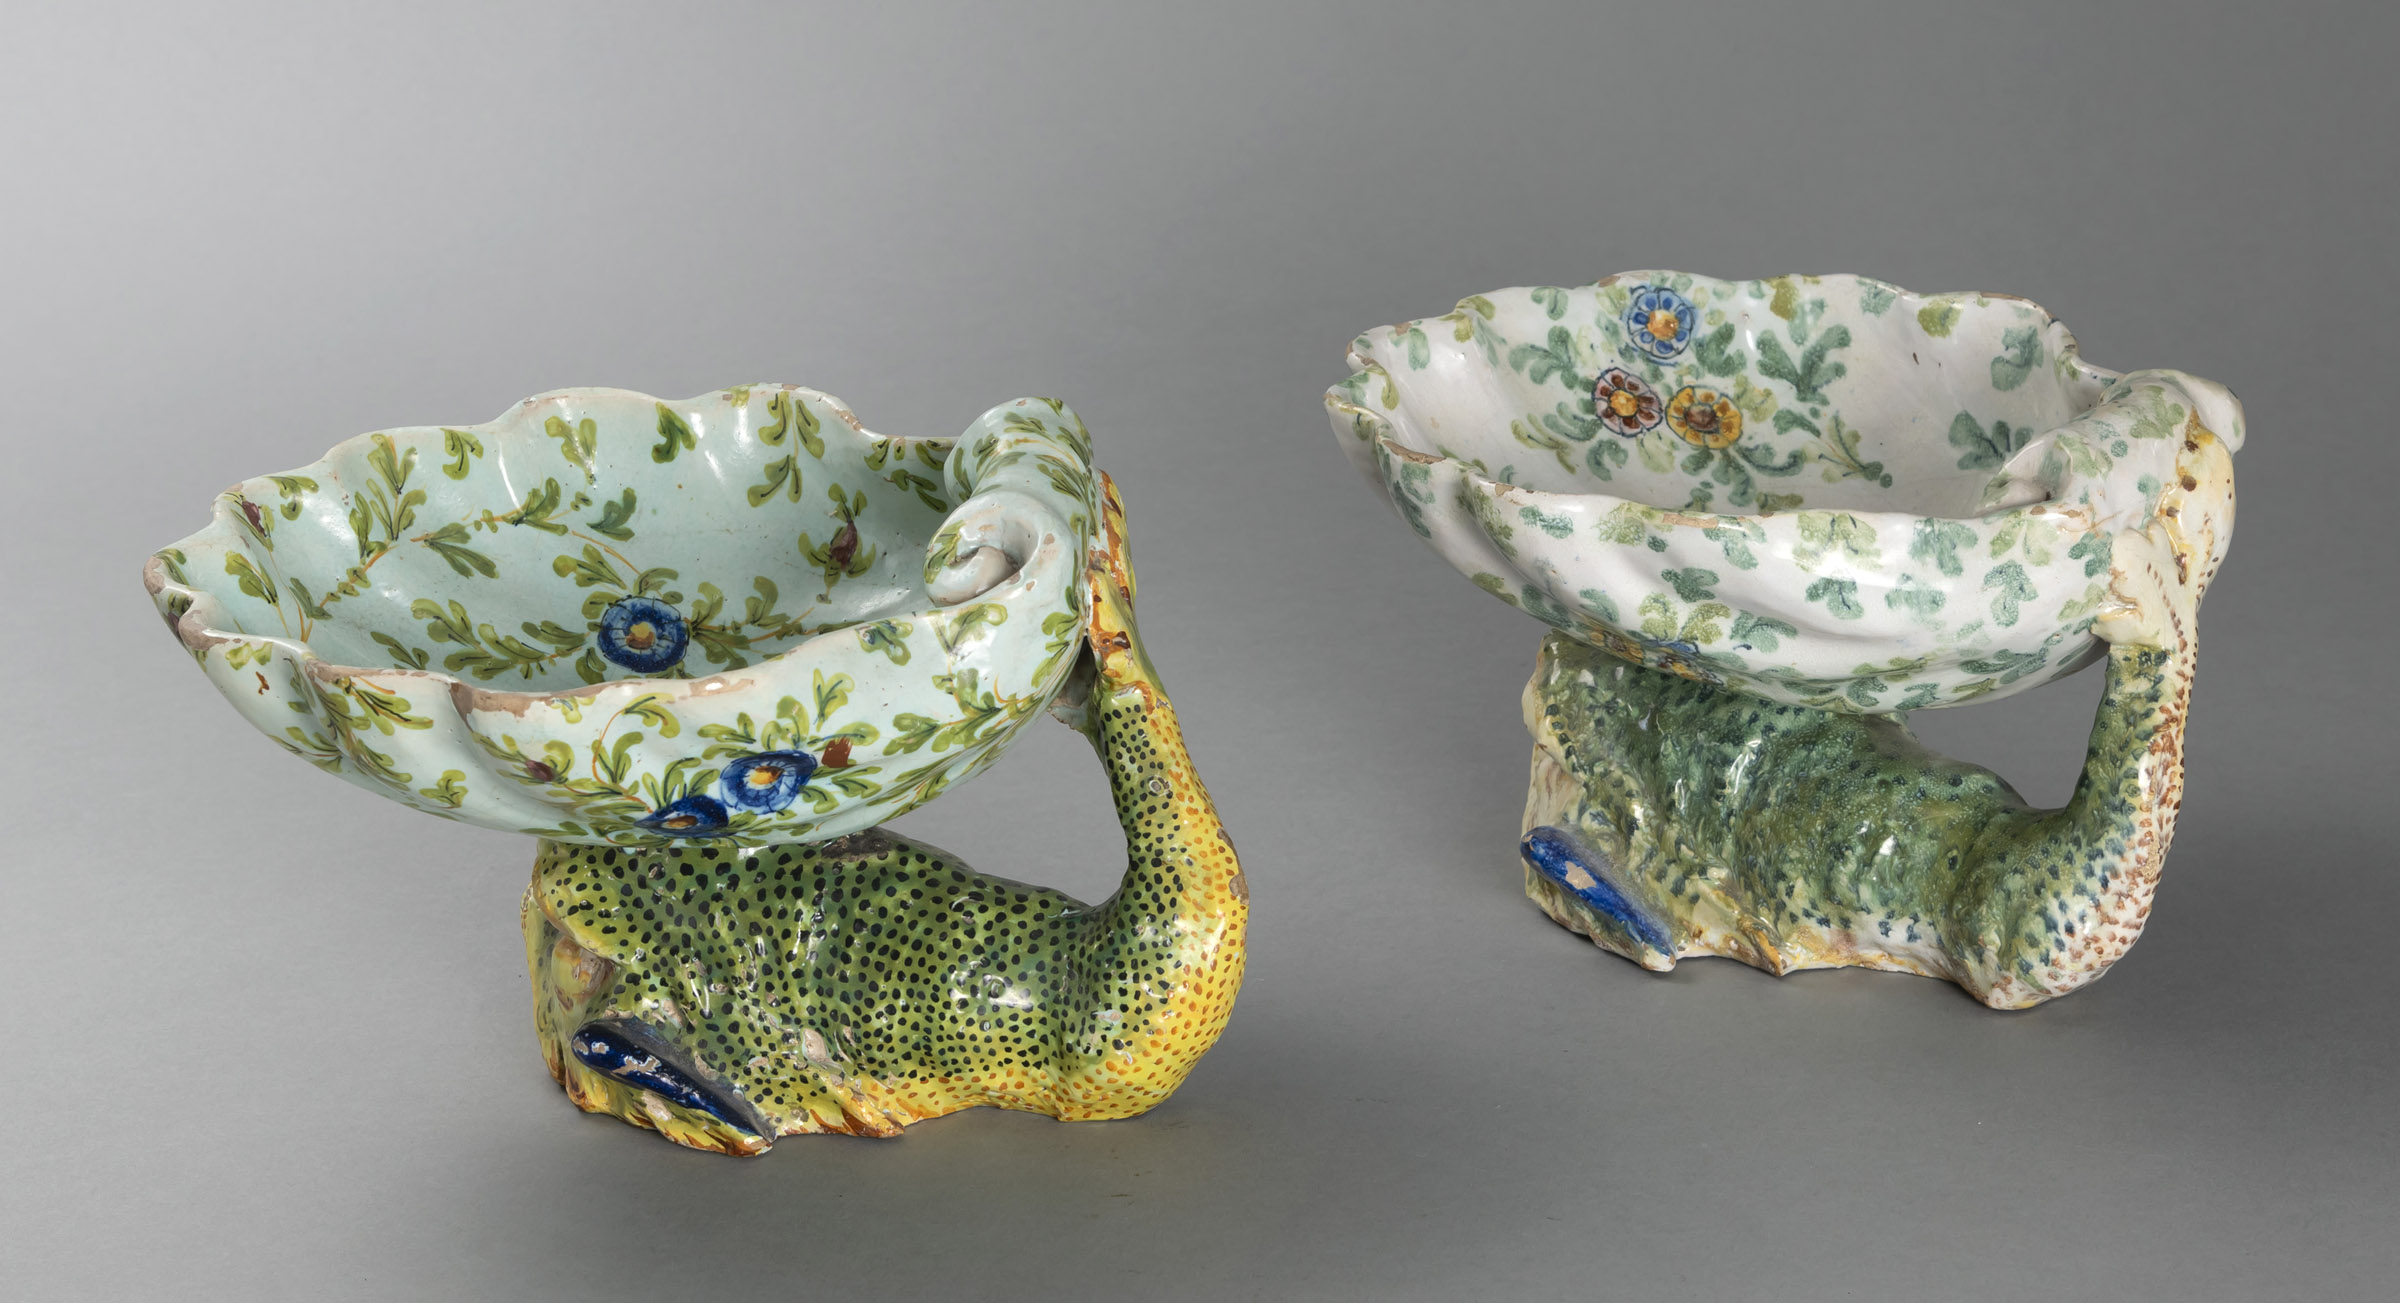 A PAIR OF SHELL SHAPED FOOTED BOWLS WITH DOLPHIN FEET - Image 2 of 4